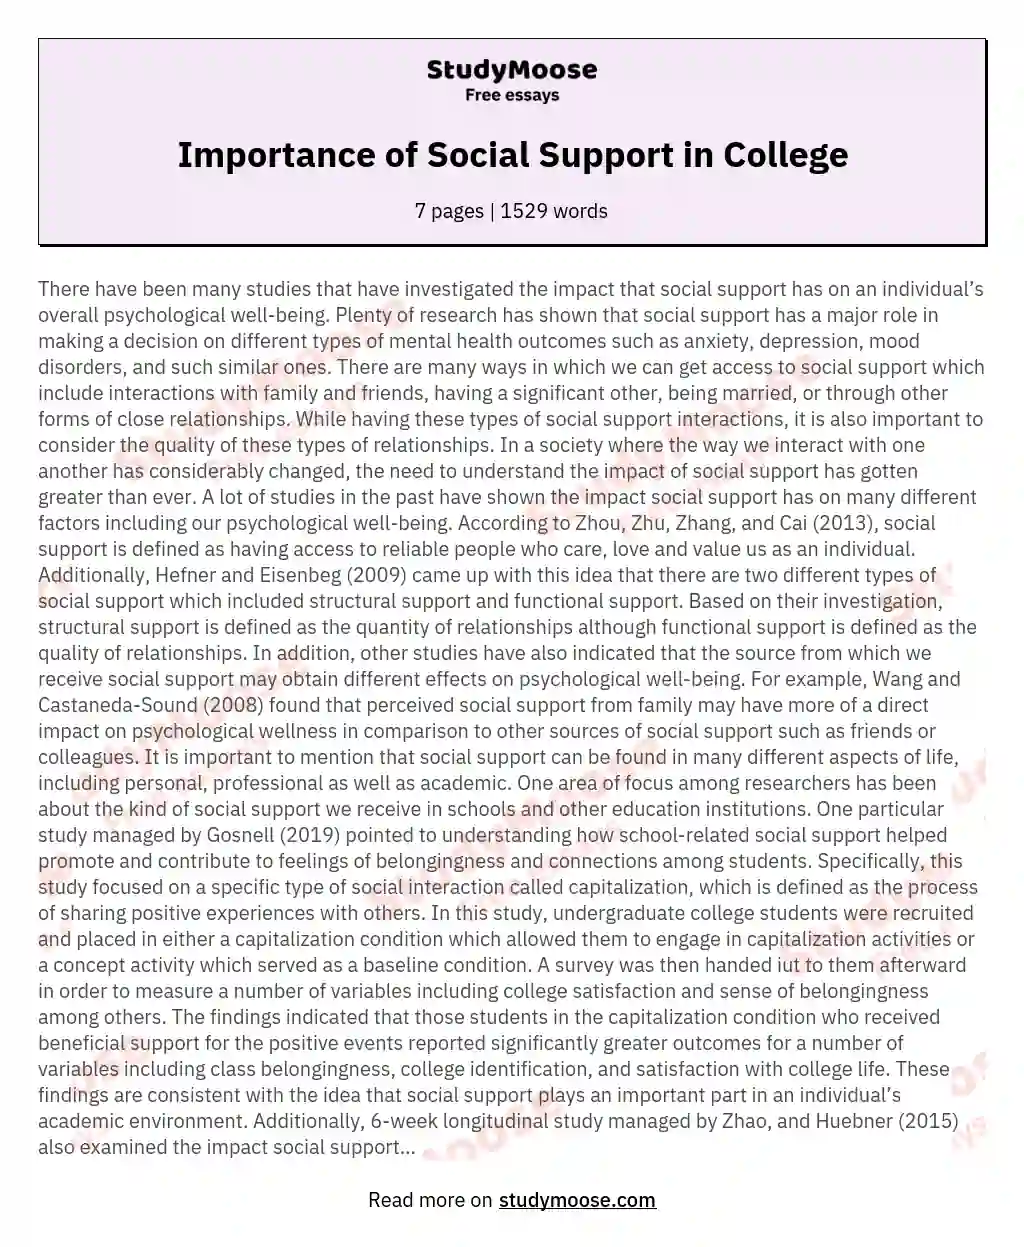 Importance of Social Support in College essay